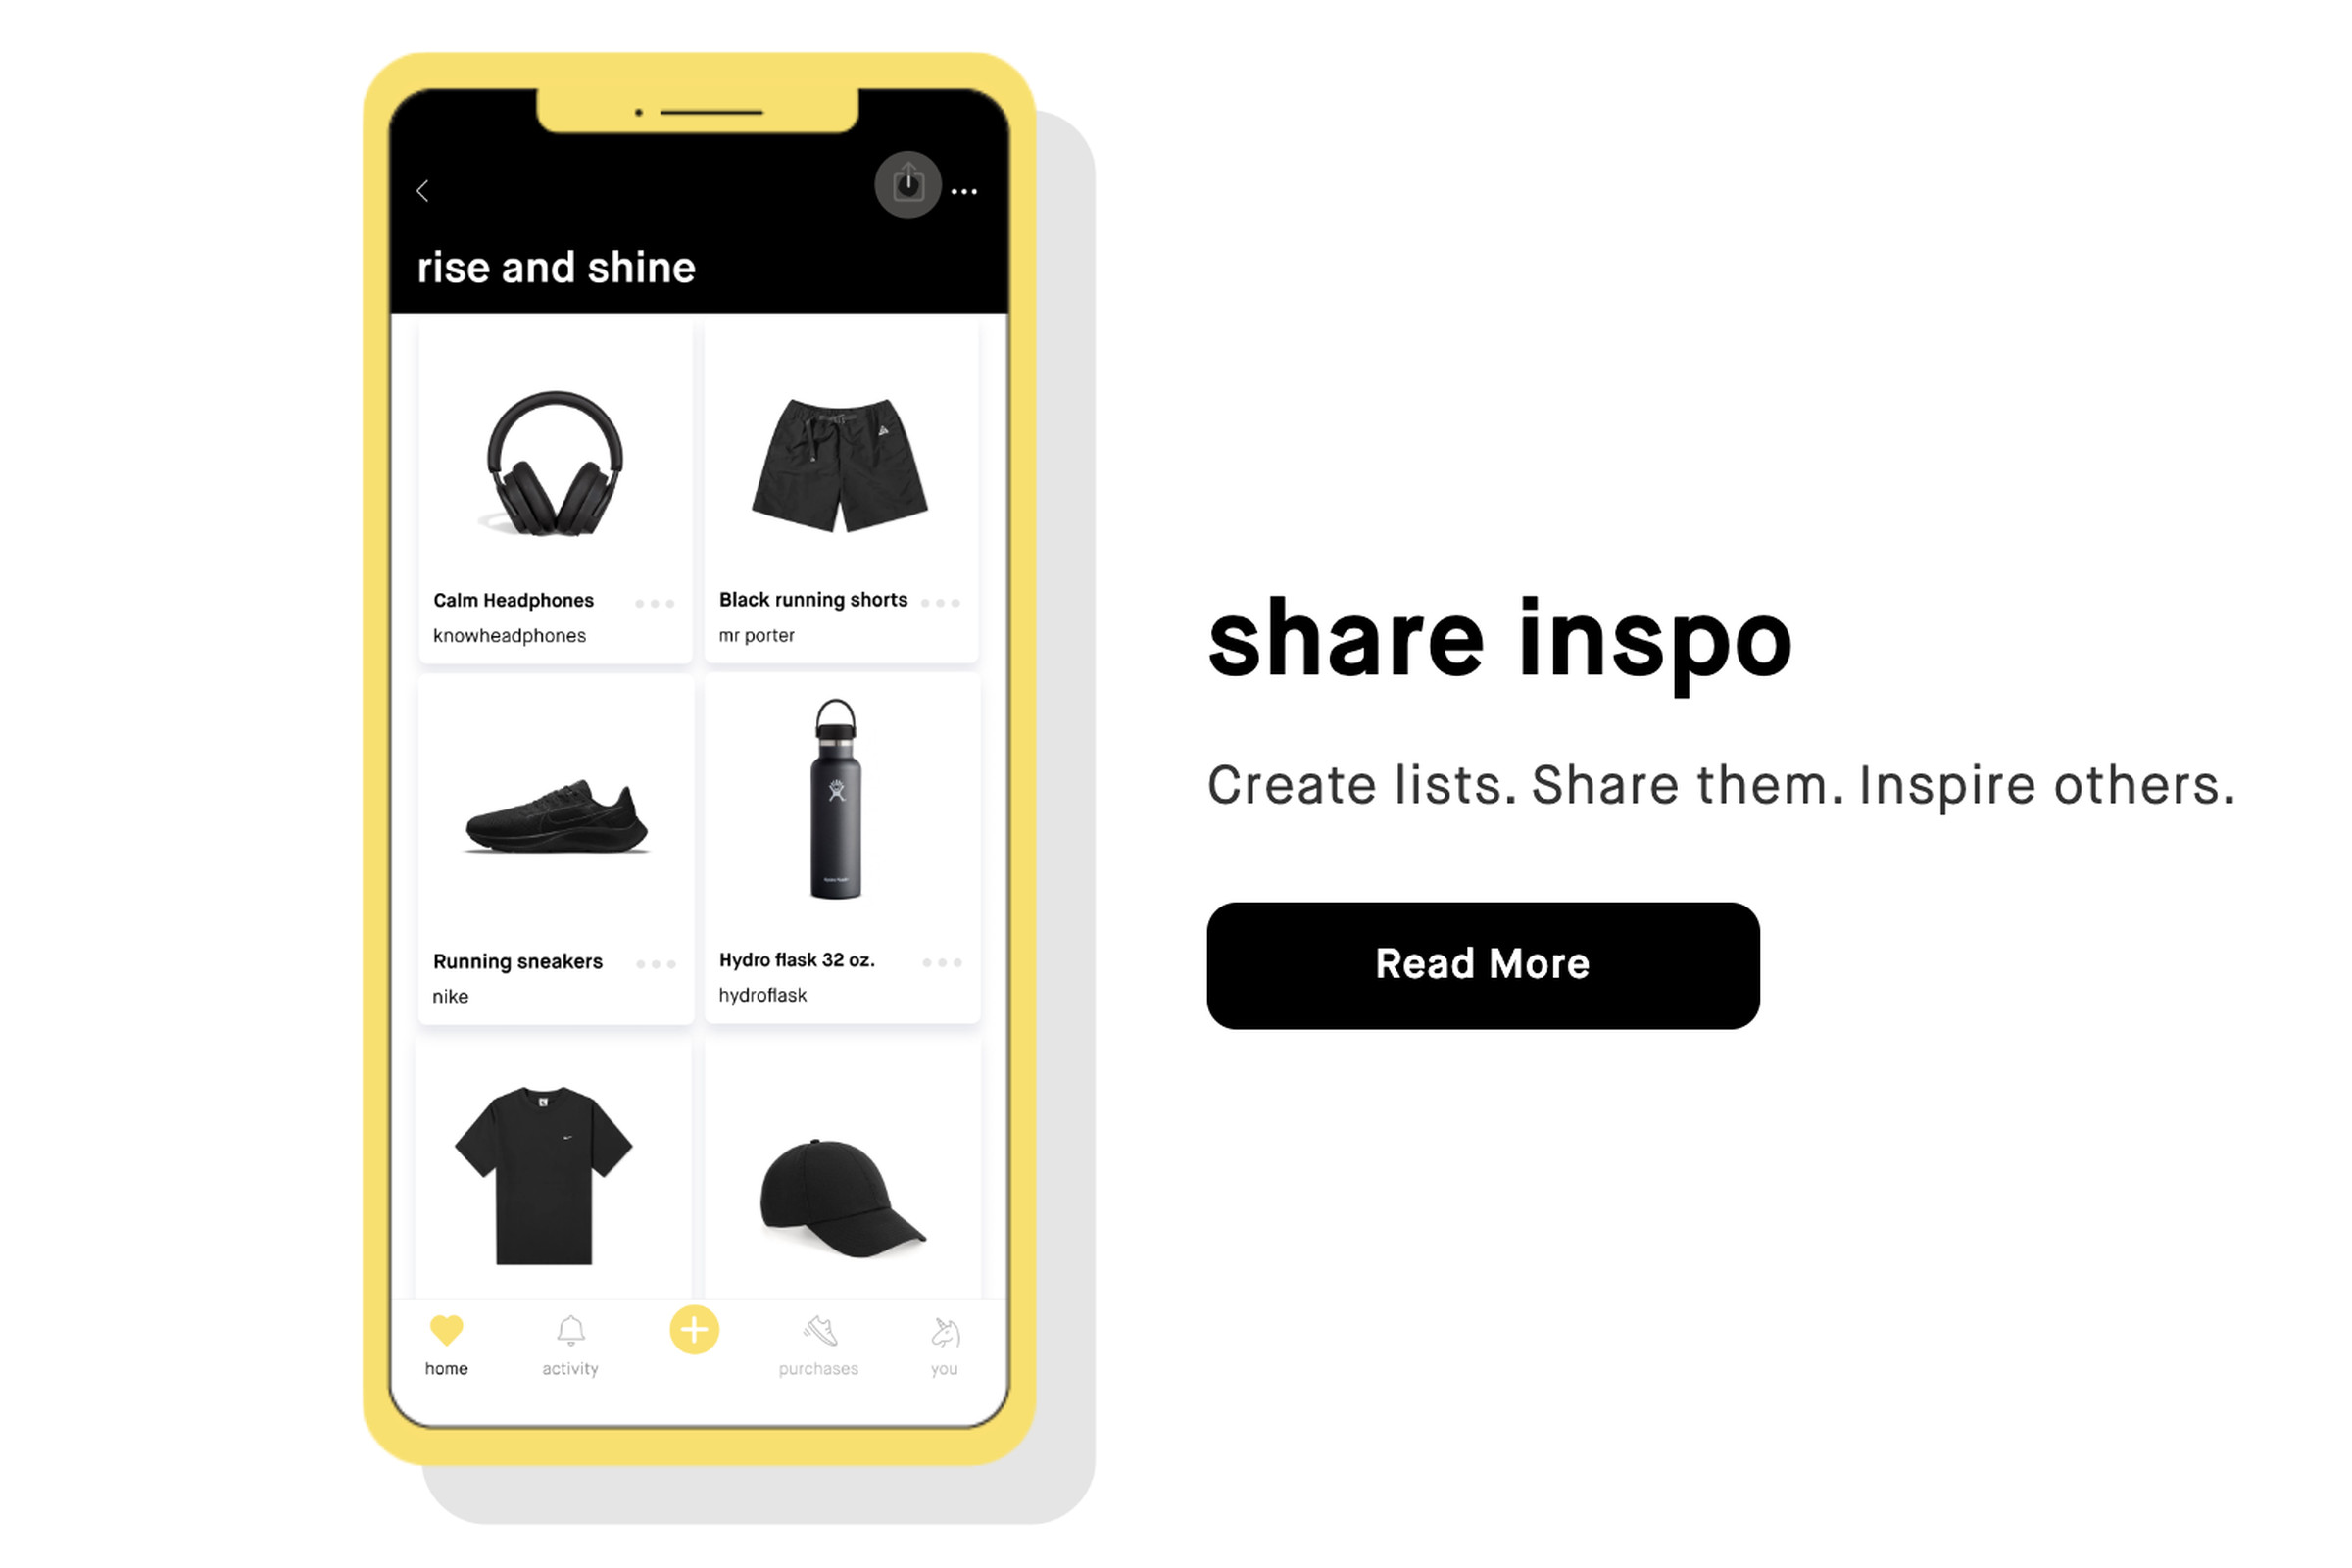 Nate app marketing material reading “Share inspo. Create lists. Share them. Inspire others.”